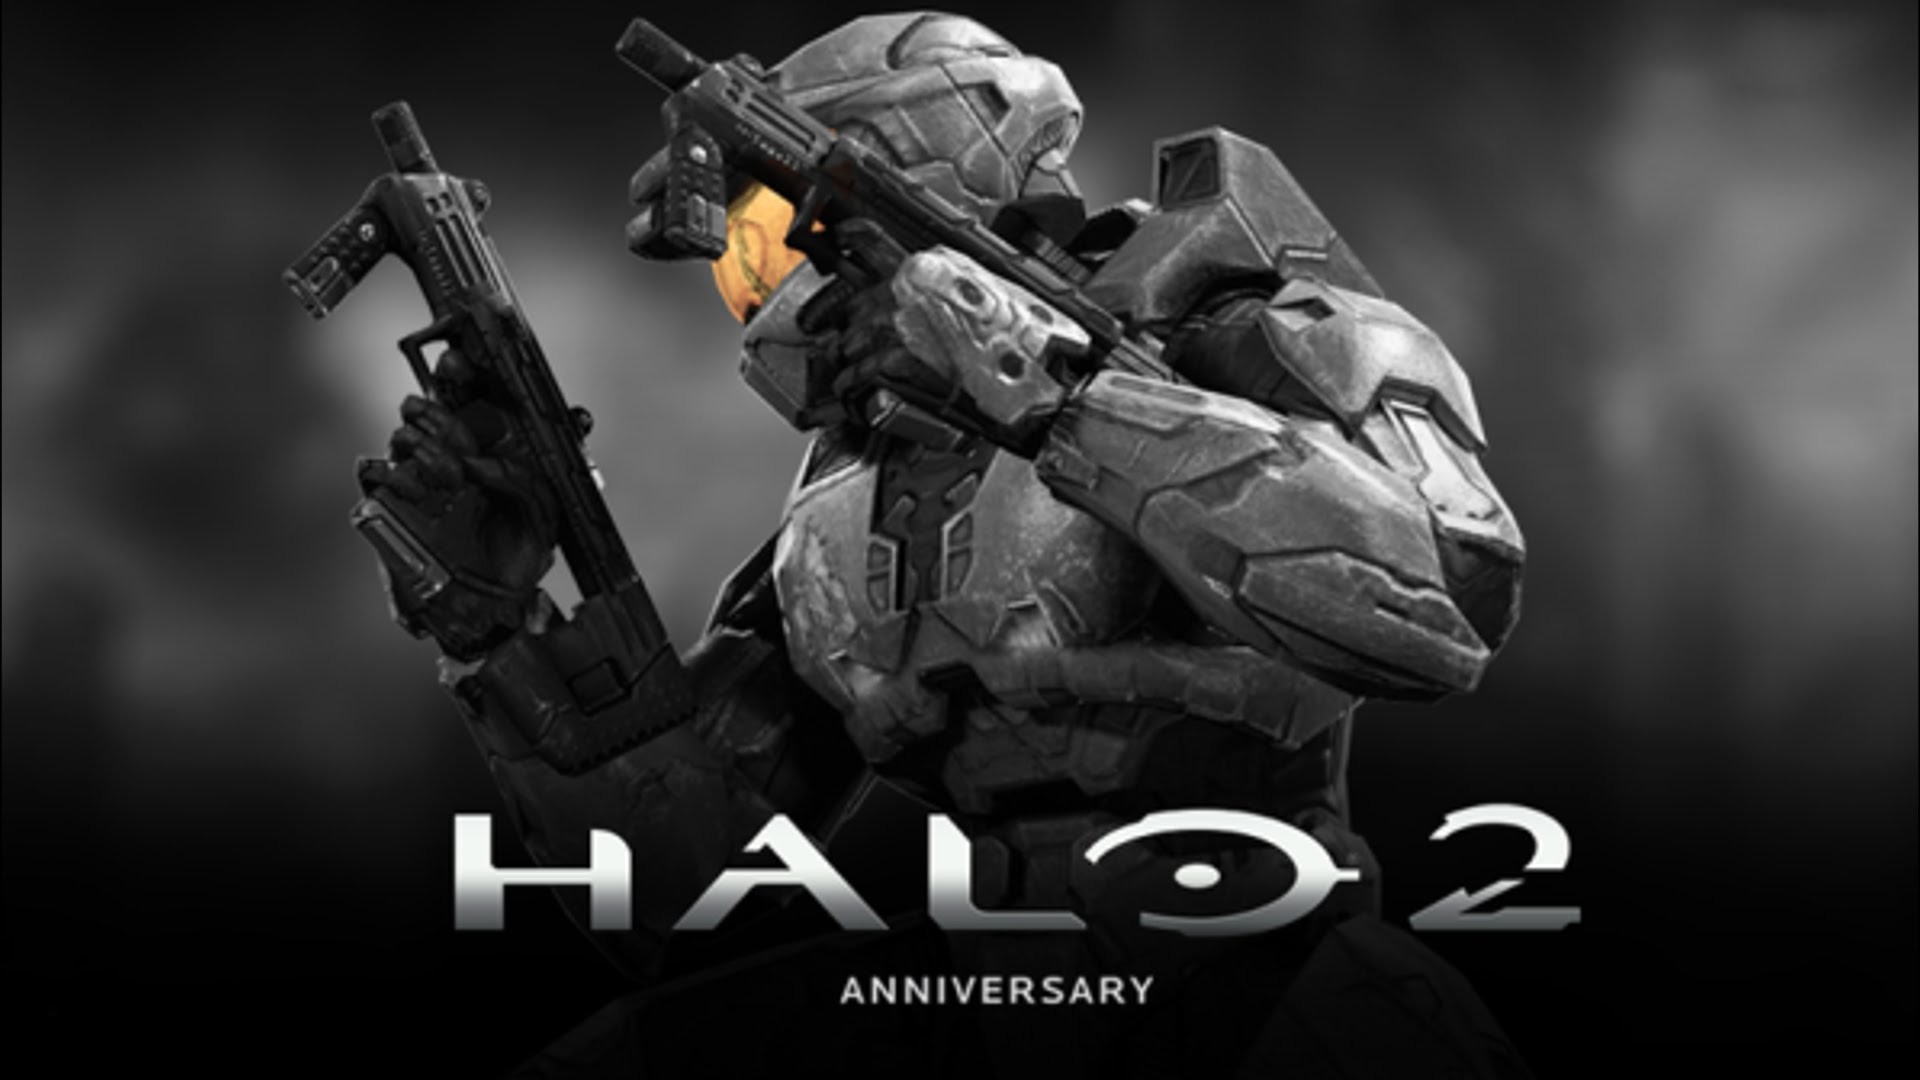 Halo 2 Anniversary Wallpaper HD (92+ images)